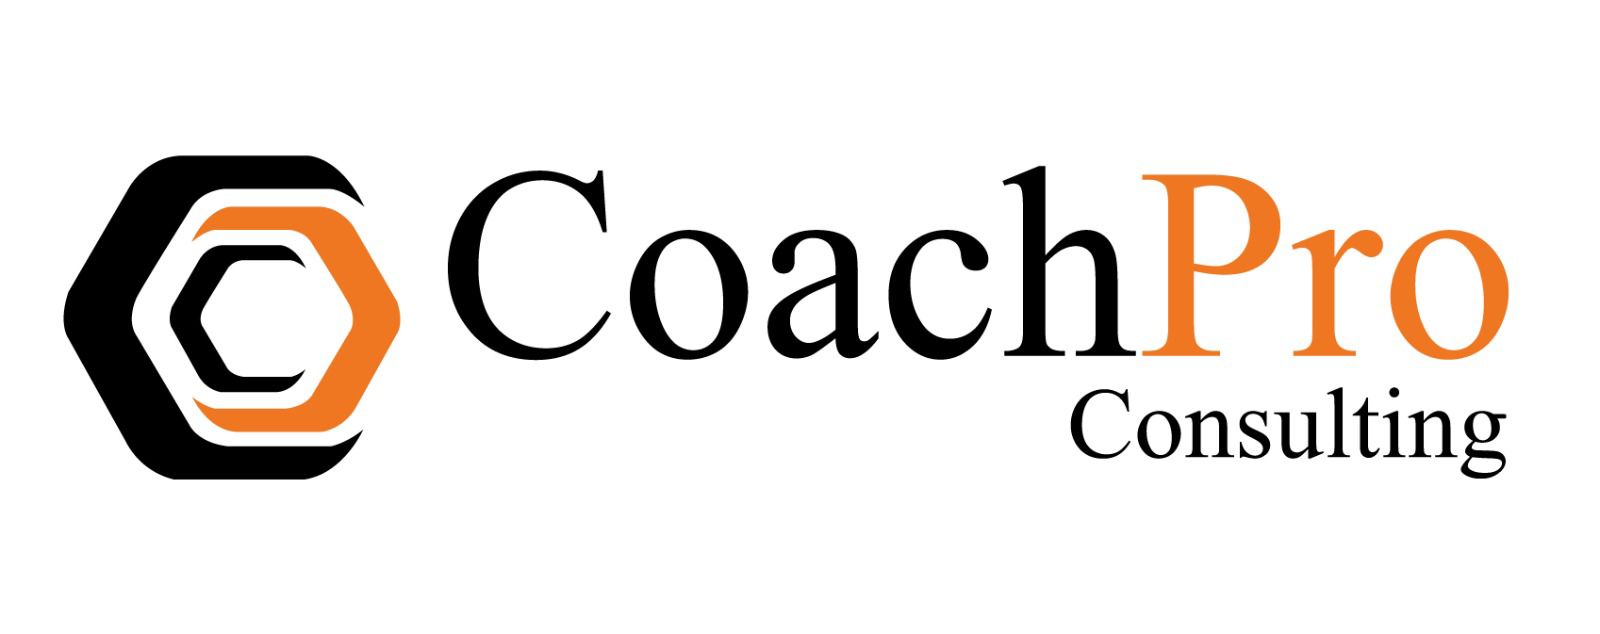 coachpro consulting